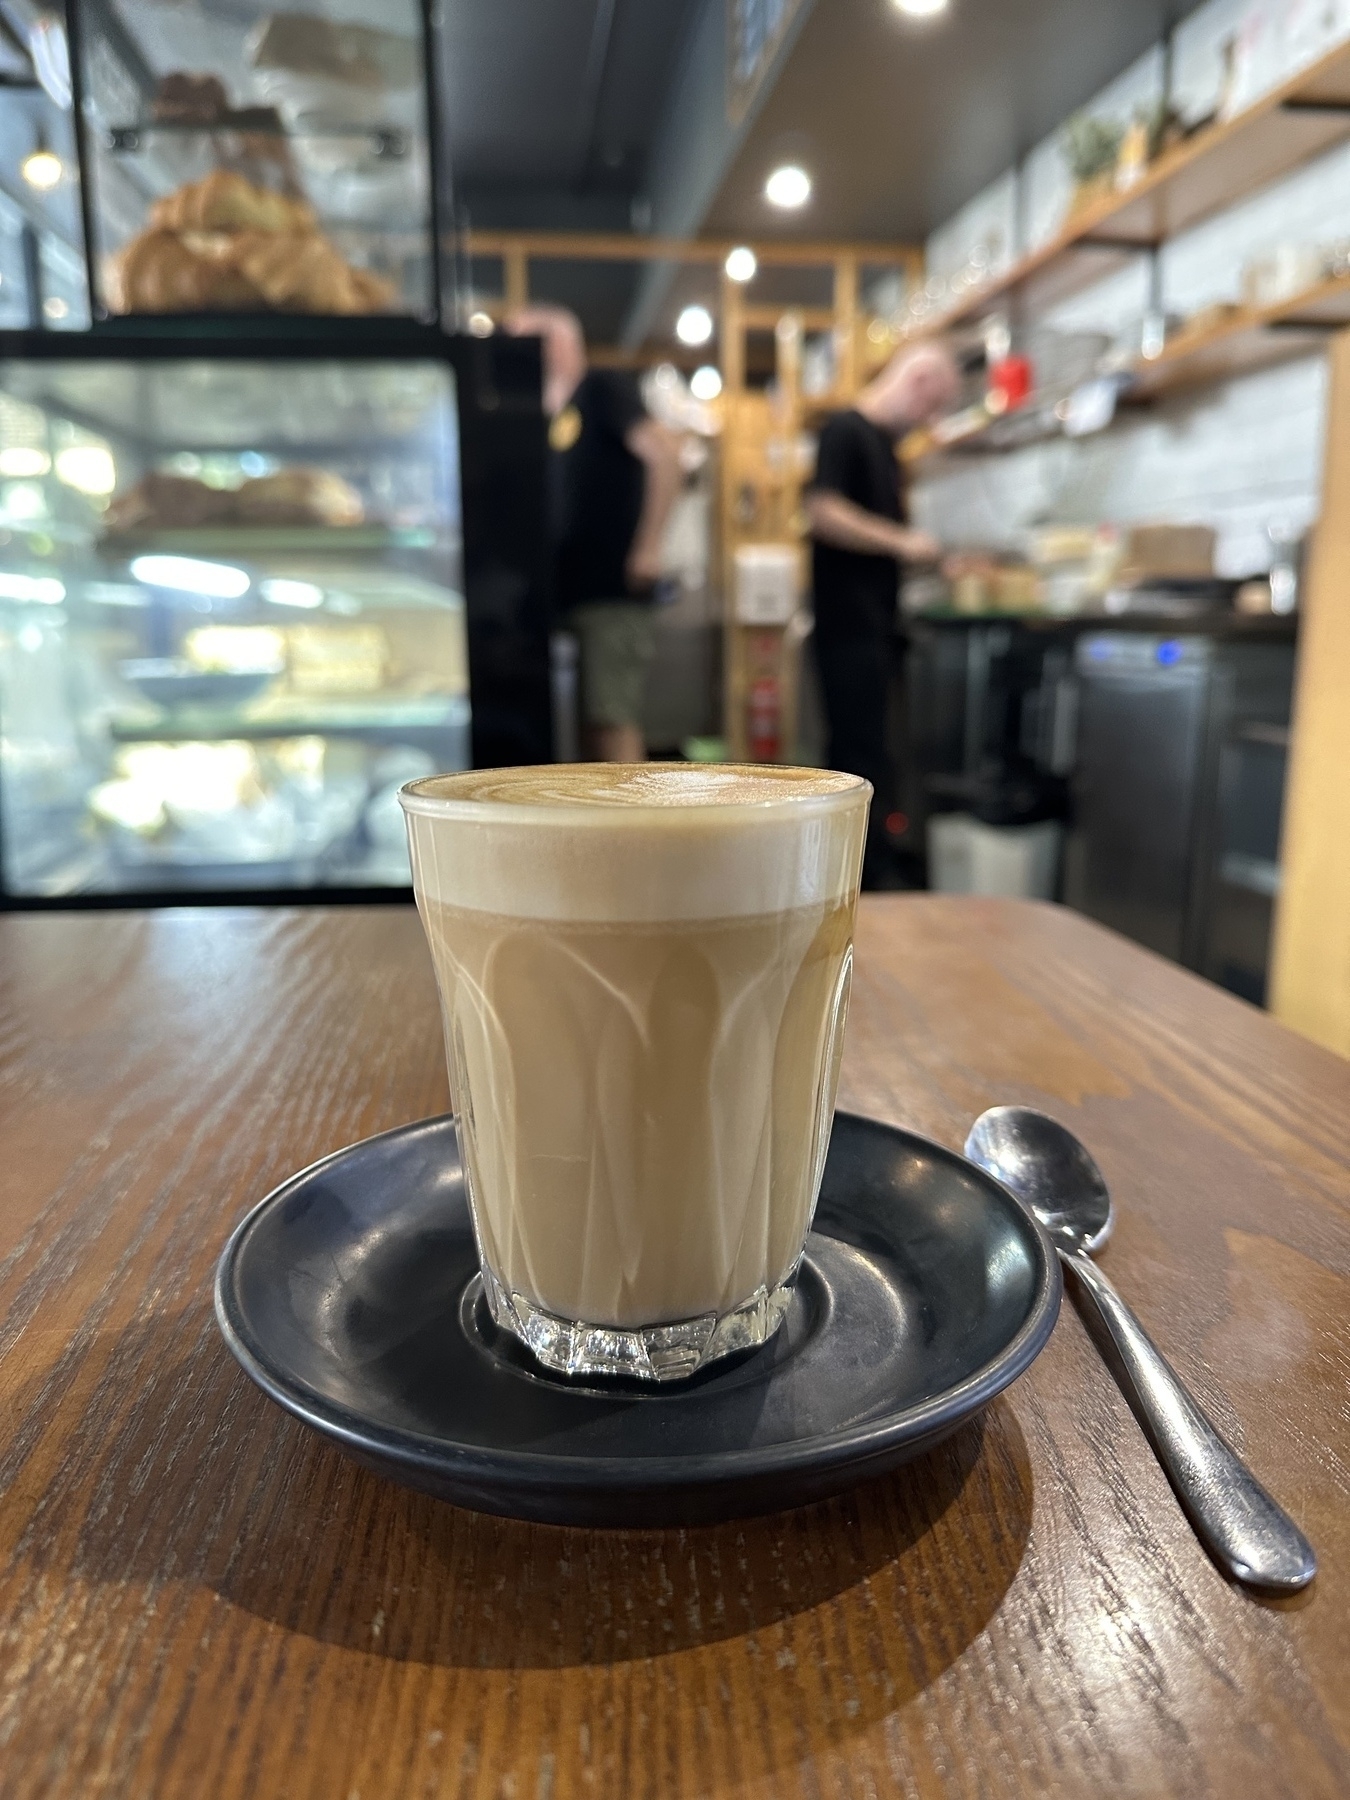 A latte in a glass sitting on a black saucer. A teaspoon is on the wooden table beside the saucer. A blurry background shows two people working behind the cafe counter.